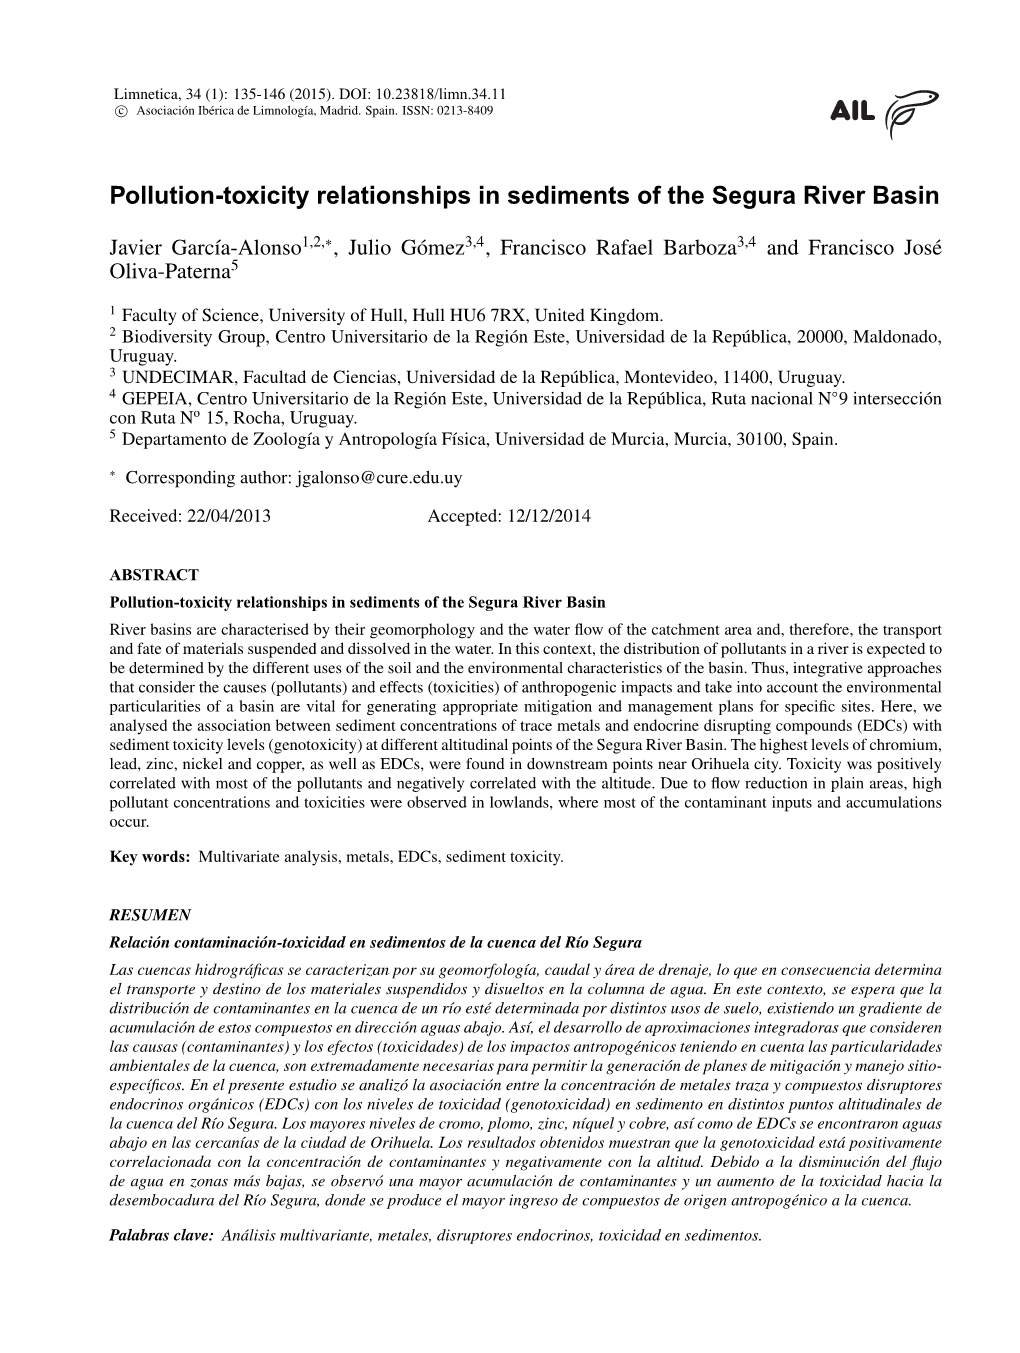 Pollution-Toxicity Relationships in Sediments of the Segura River Basin